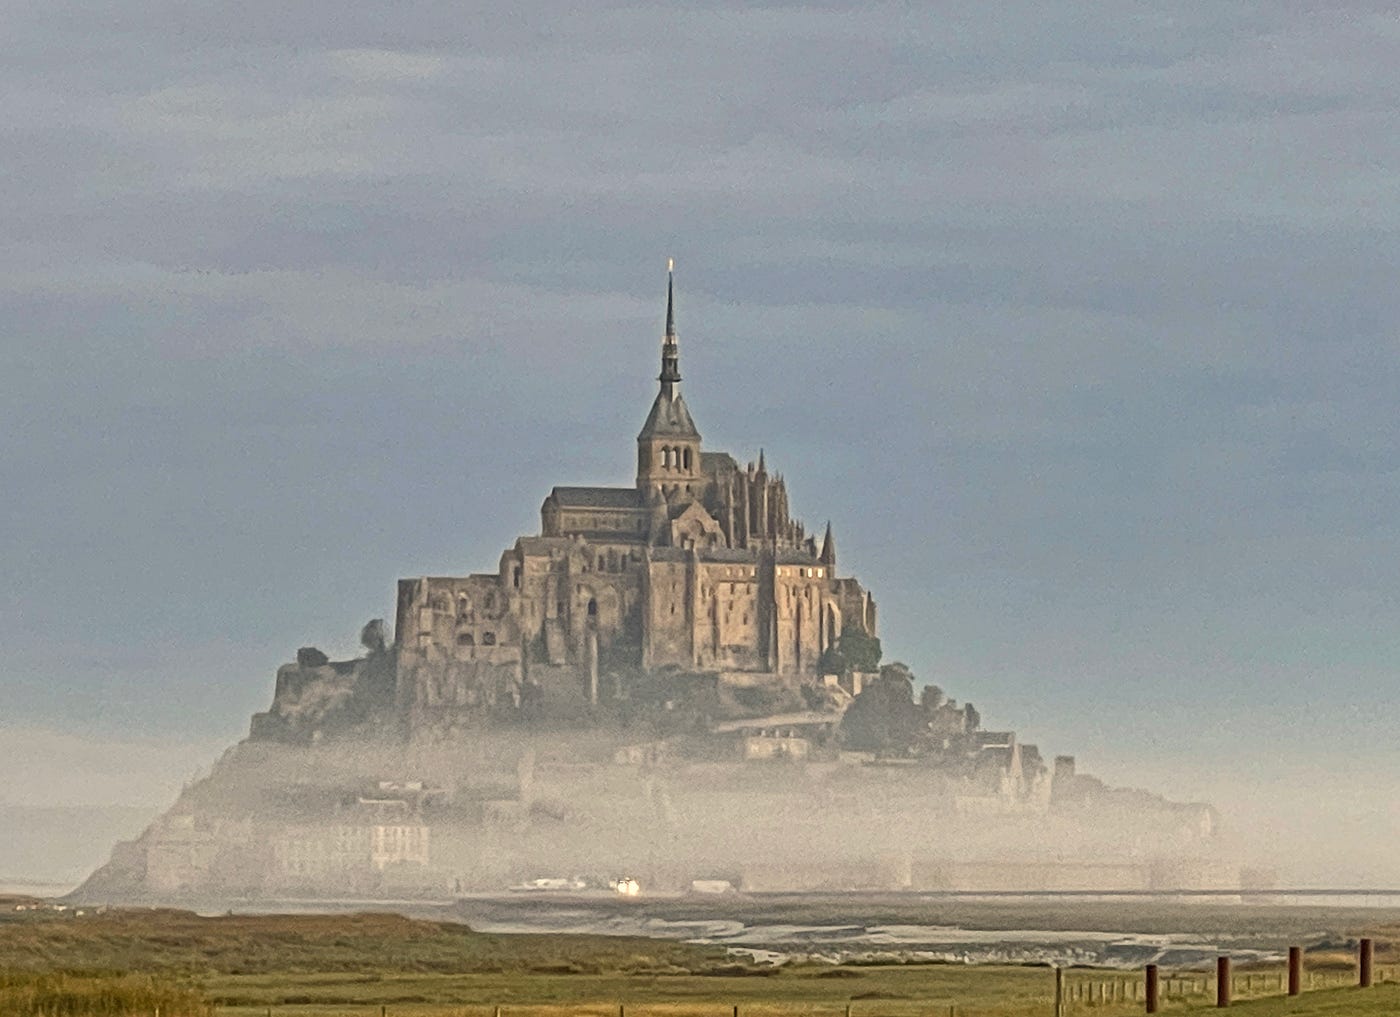 Mont-Saint-Michel: 8 things you probably didn't know about this